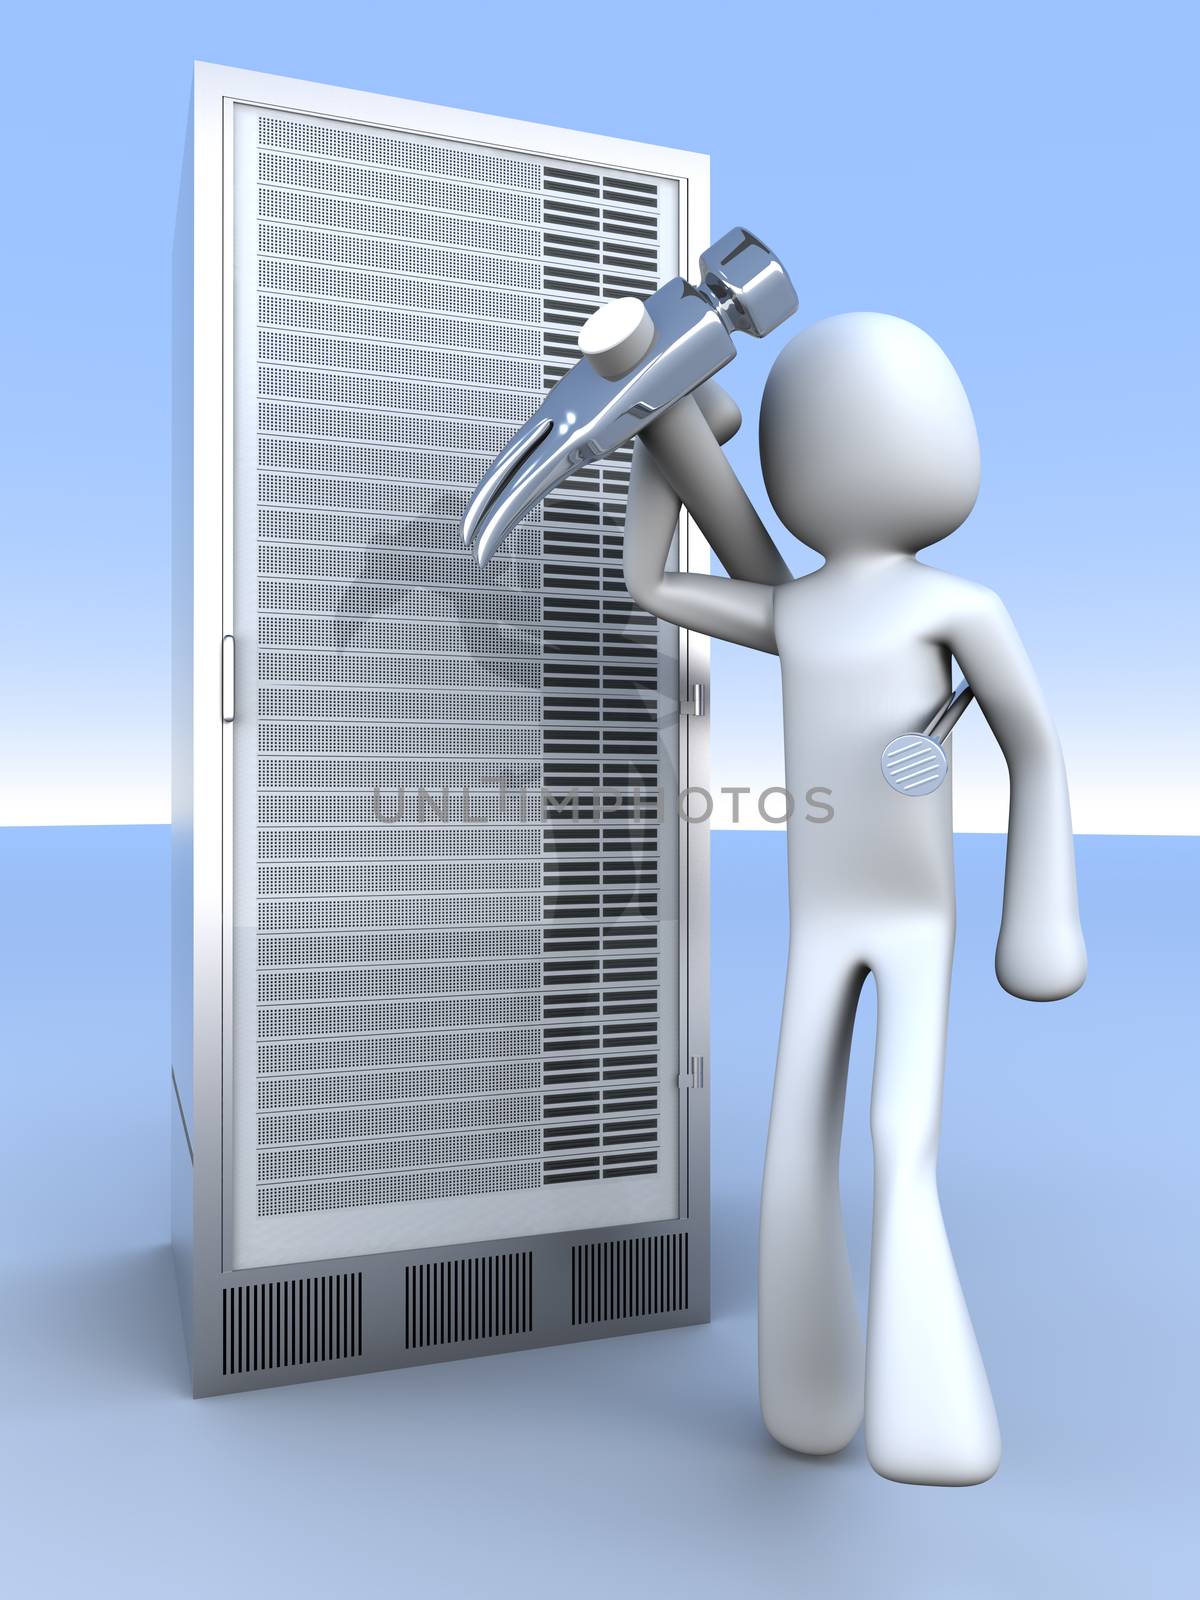 Repairing a Server tower. 3d rendered Illustration.